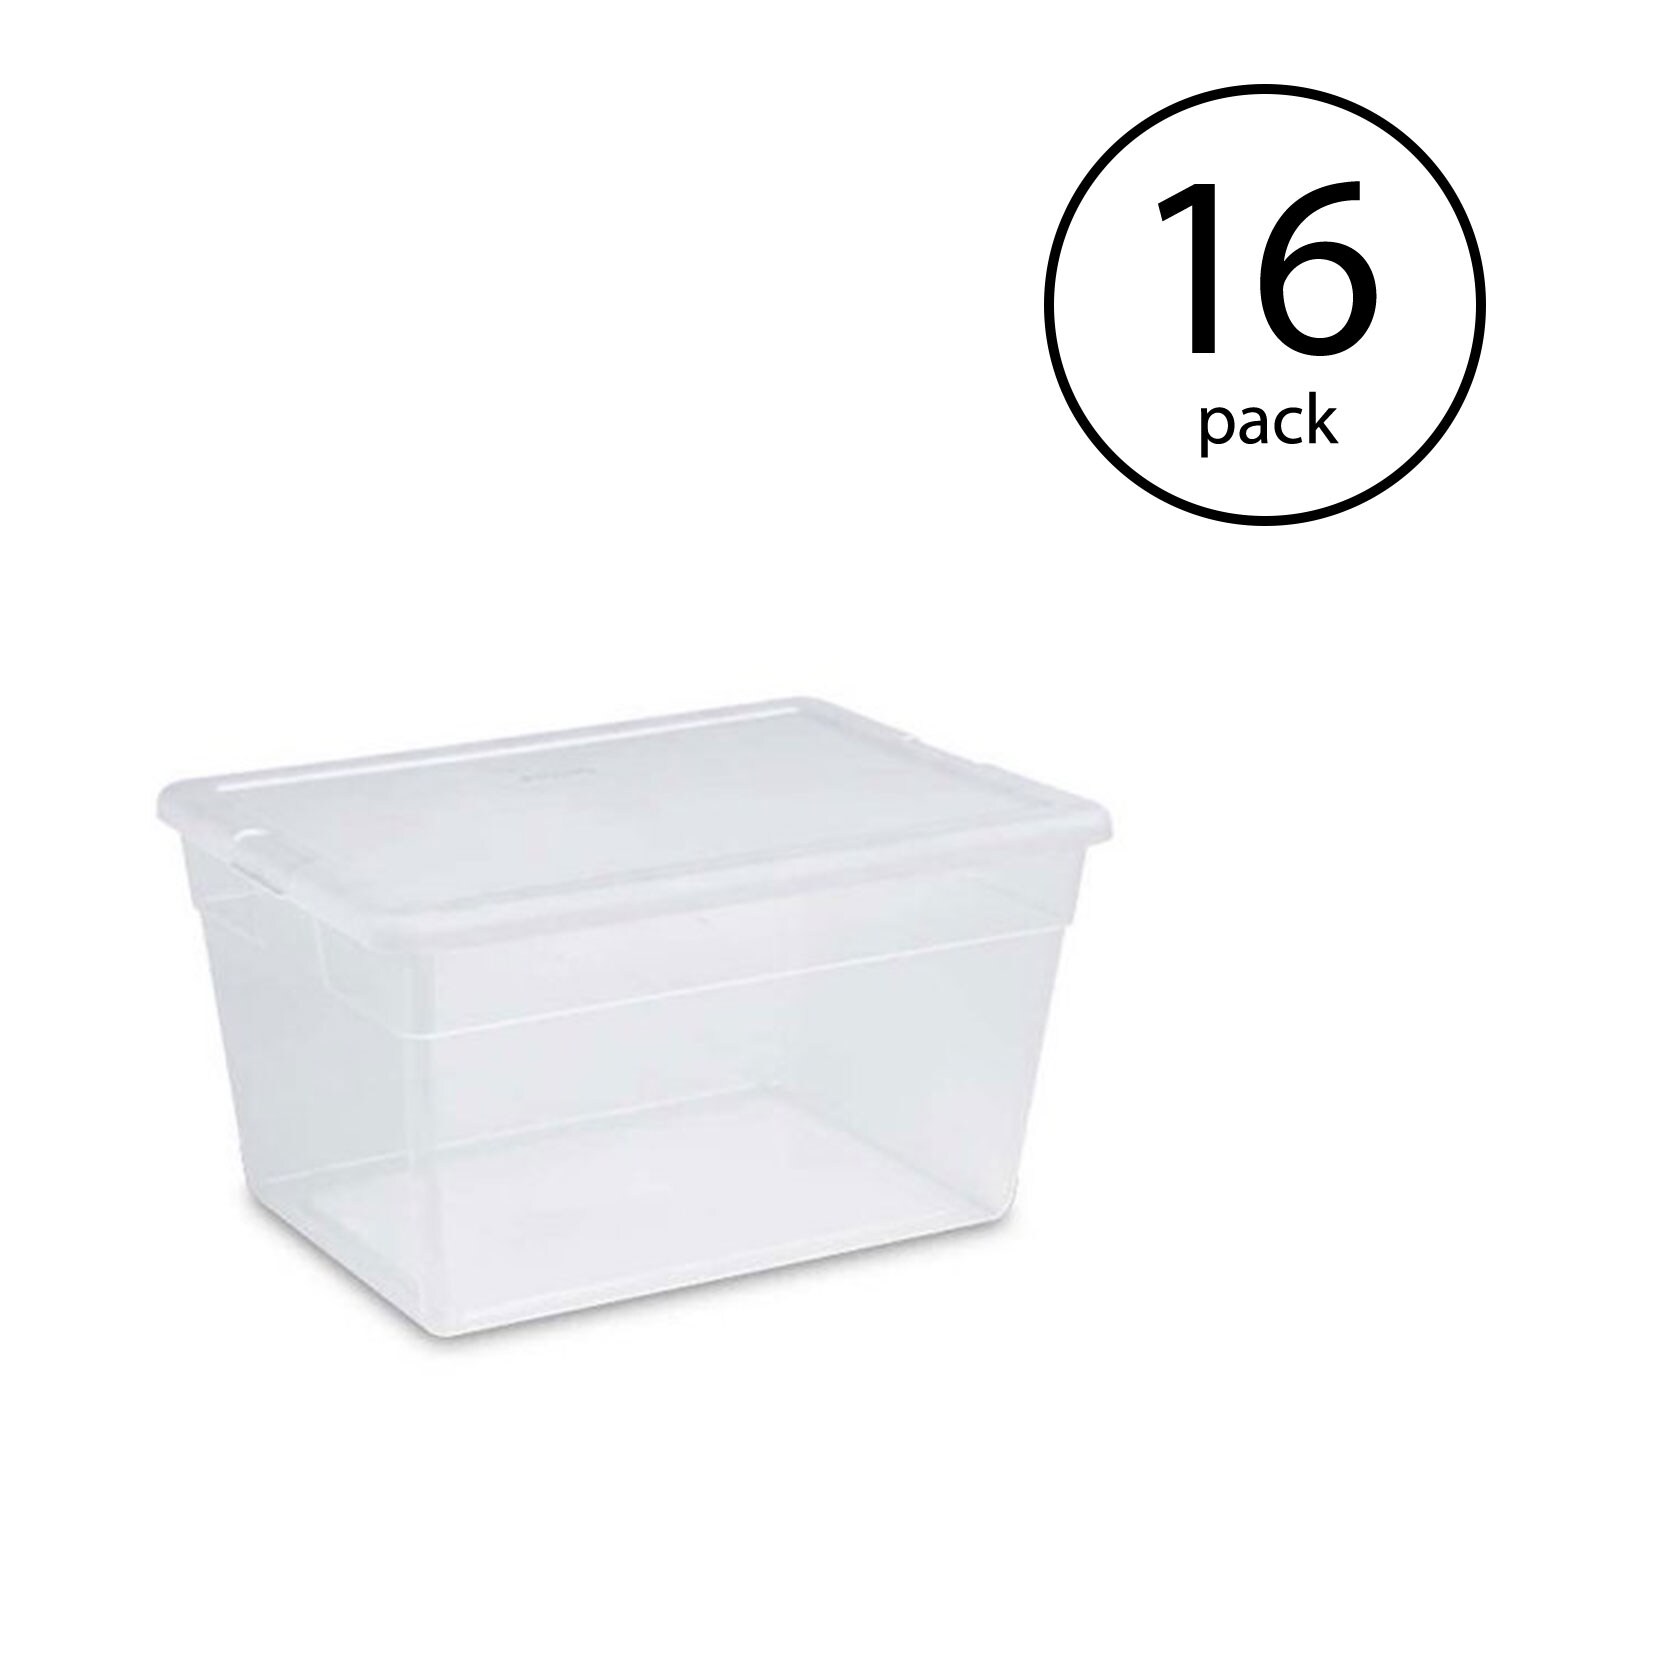 8 Pack Sterilite 56 Quart Clear Plastic Storage Container Box w/ Latching Lid 